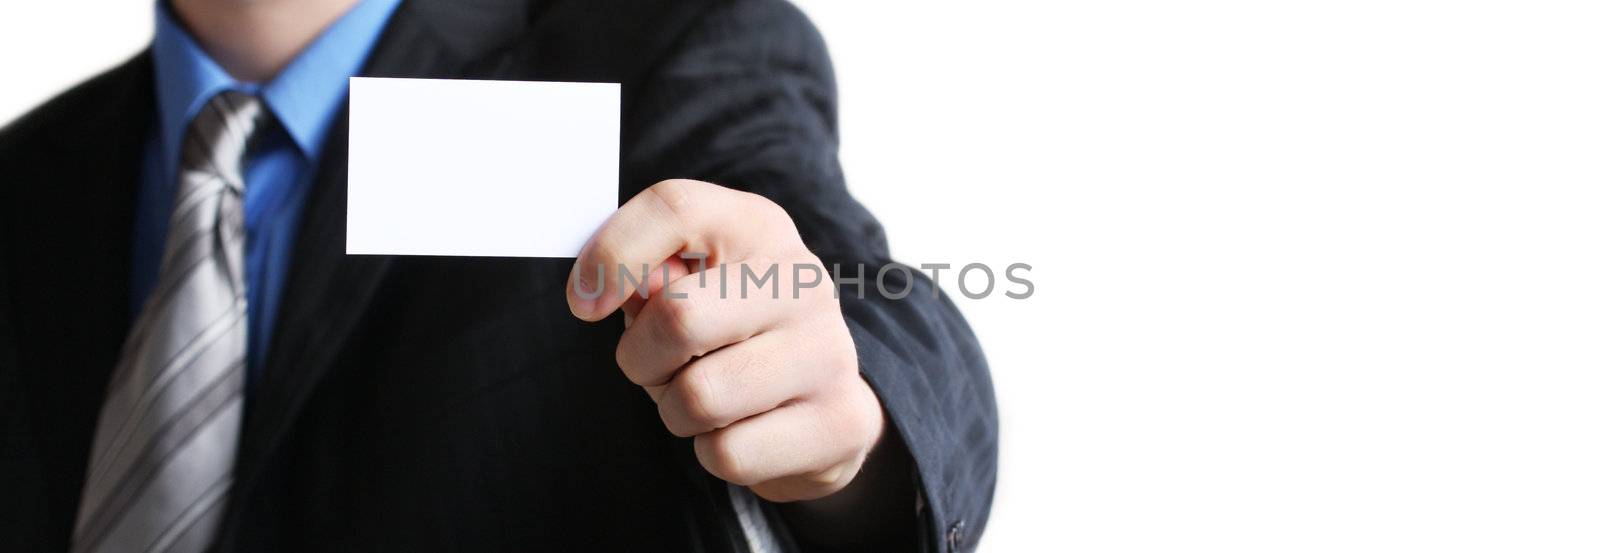 Businessman with business card by photochecker